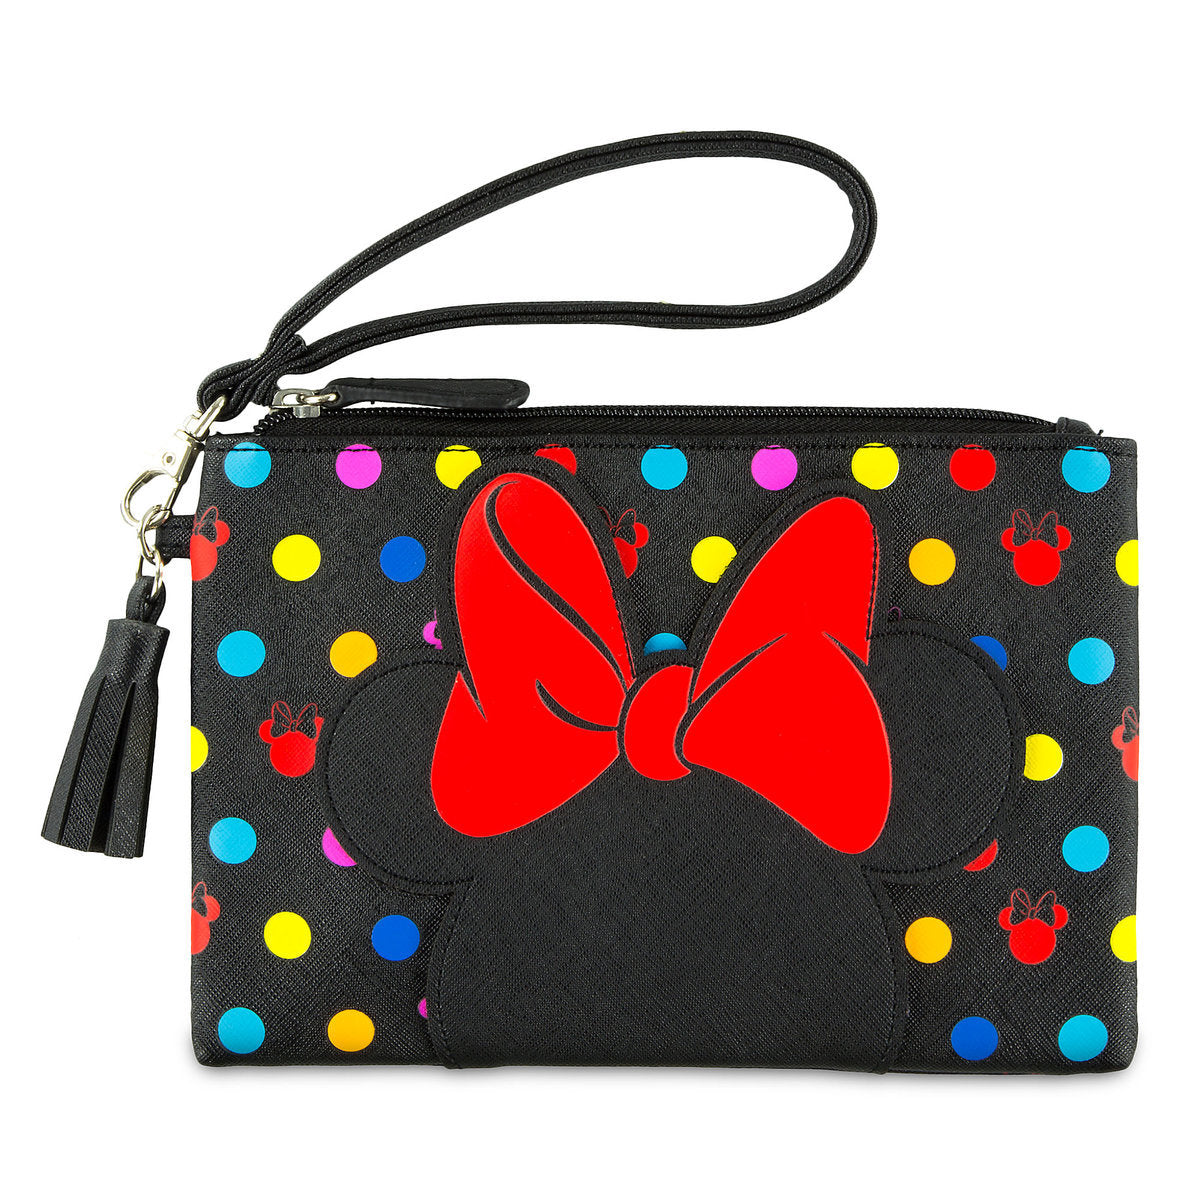 Disney Boutique Minnie Mouse Polka Dot Wristlet New with Tags